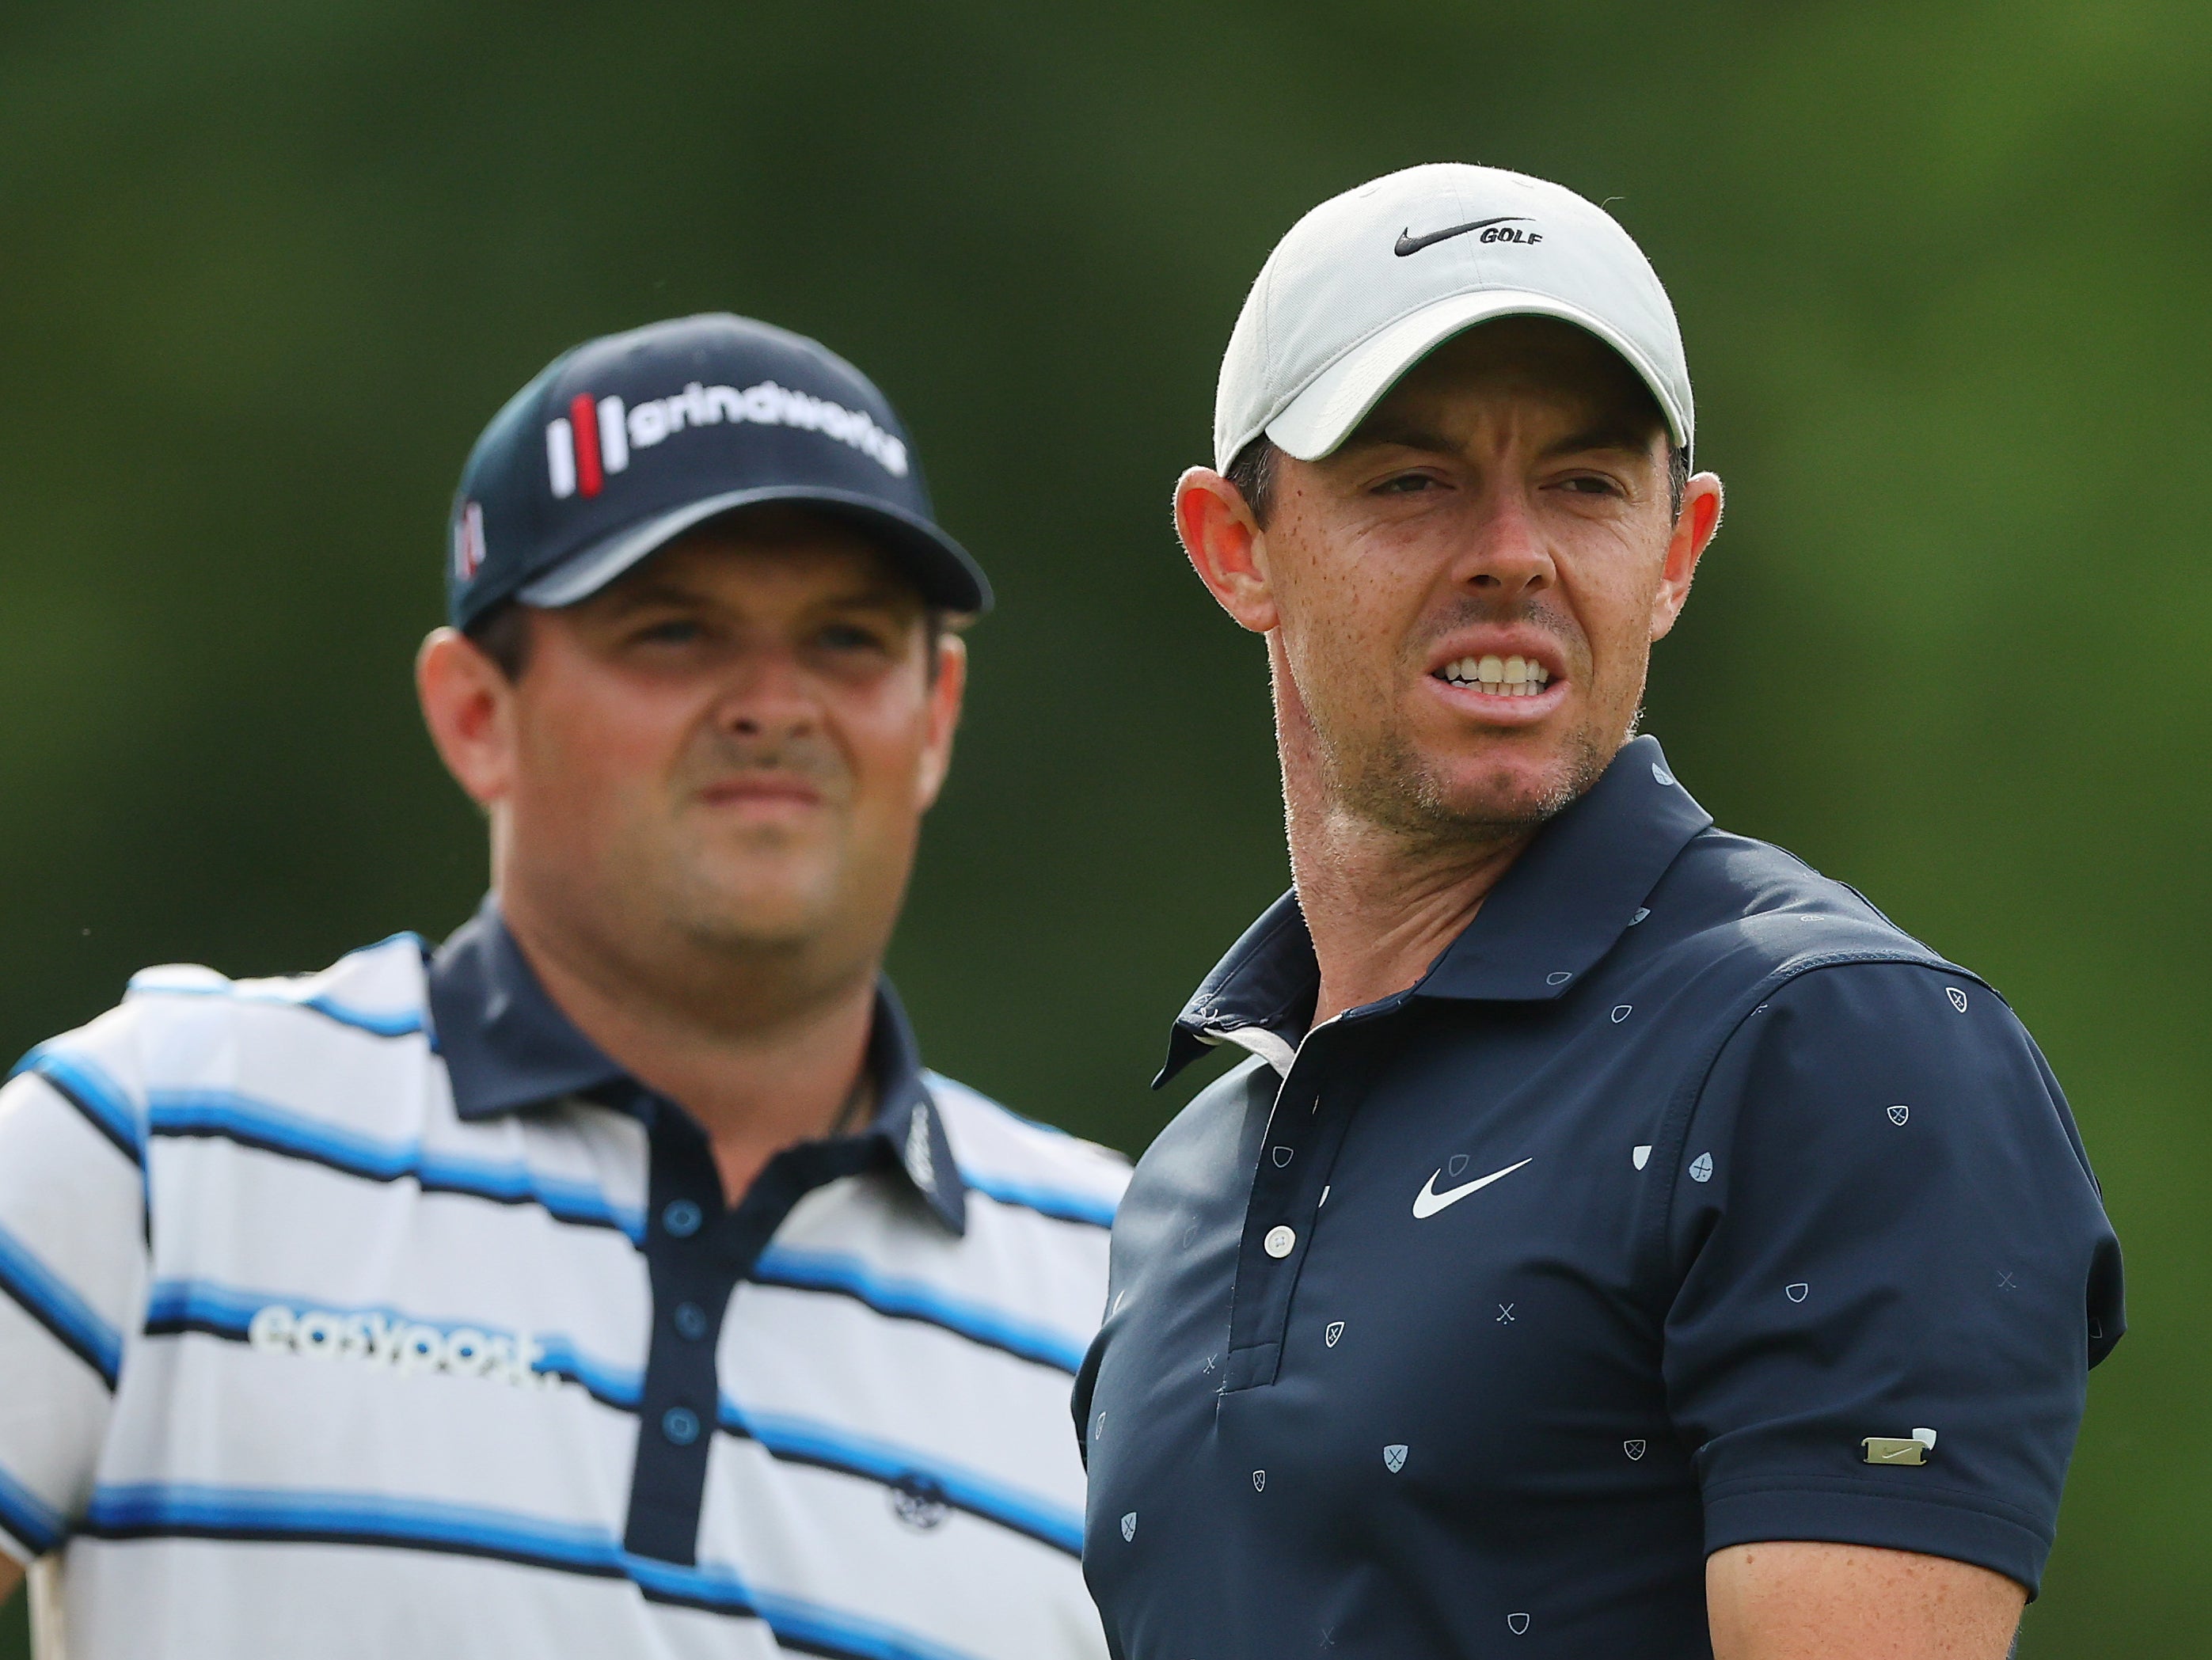 Reed and McIlroy are at the centre of golf’s latest storm